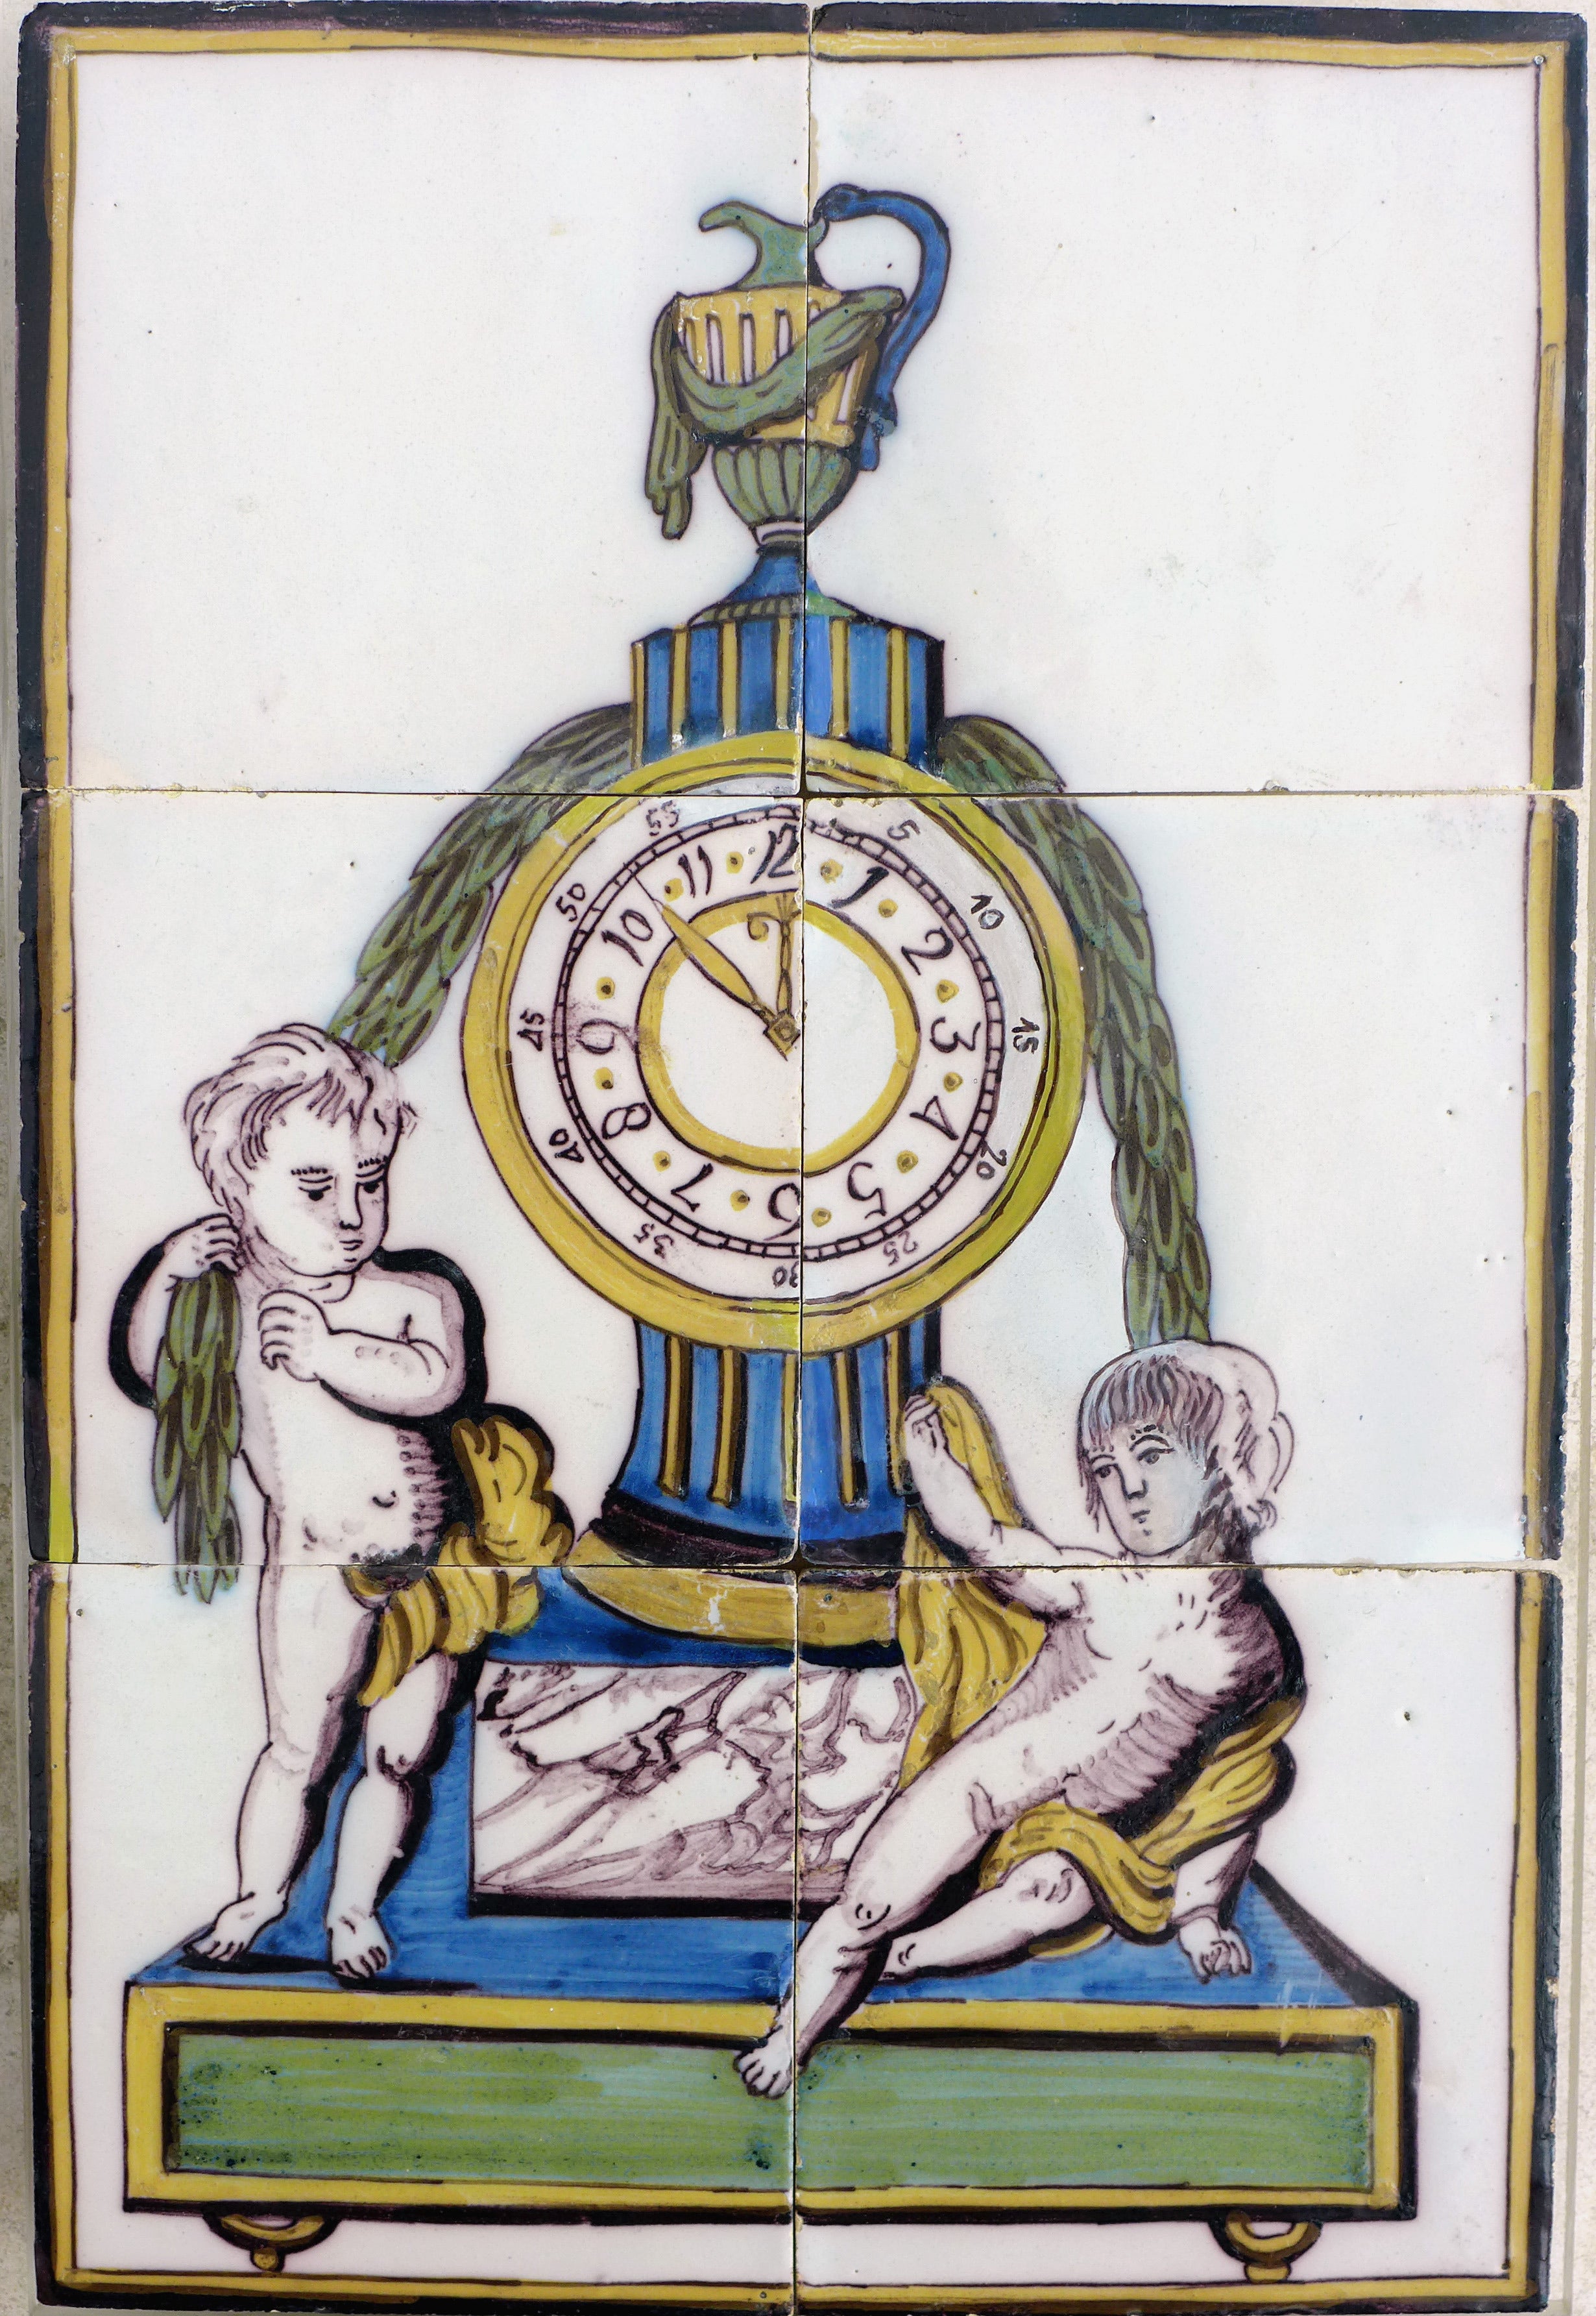 Unusual Late 18th Century Dutch Polychrome Tile Picture of a Clock